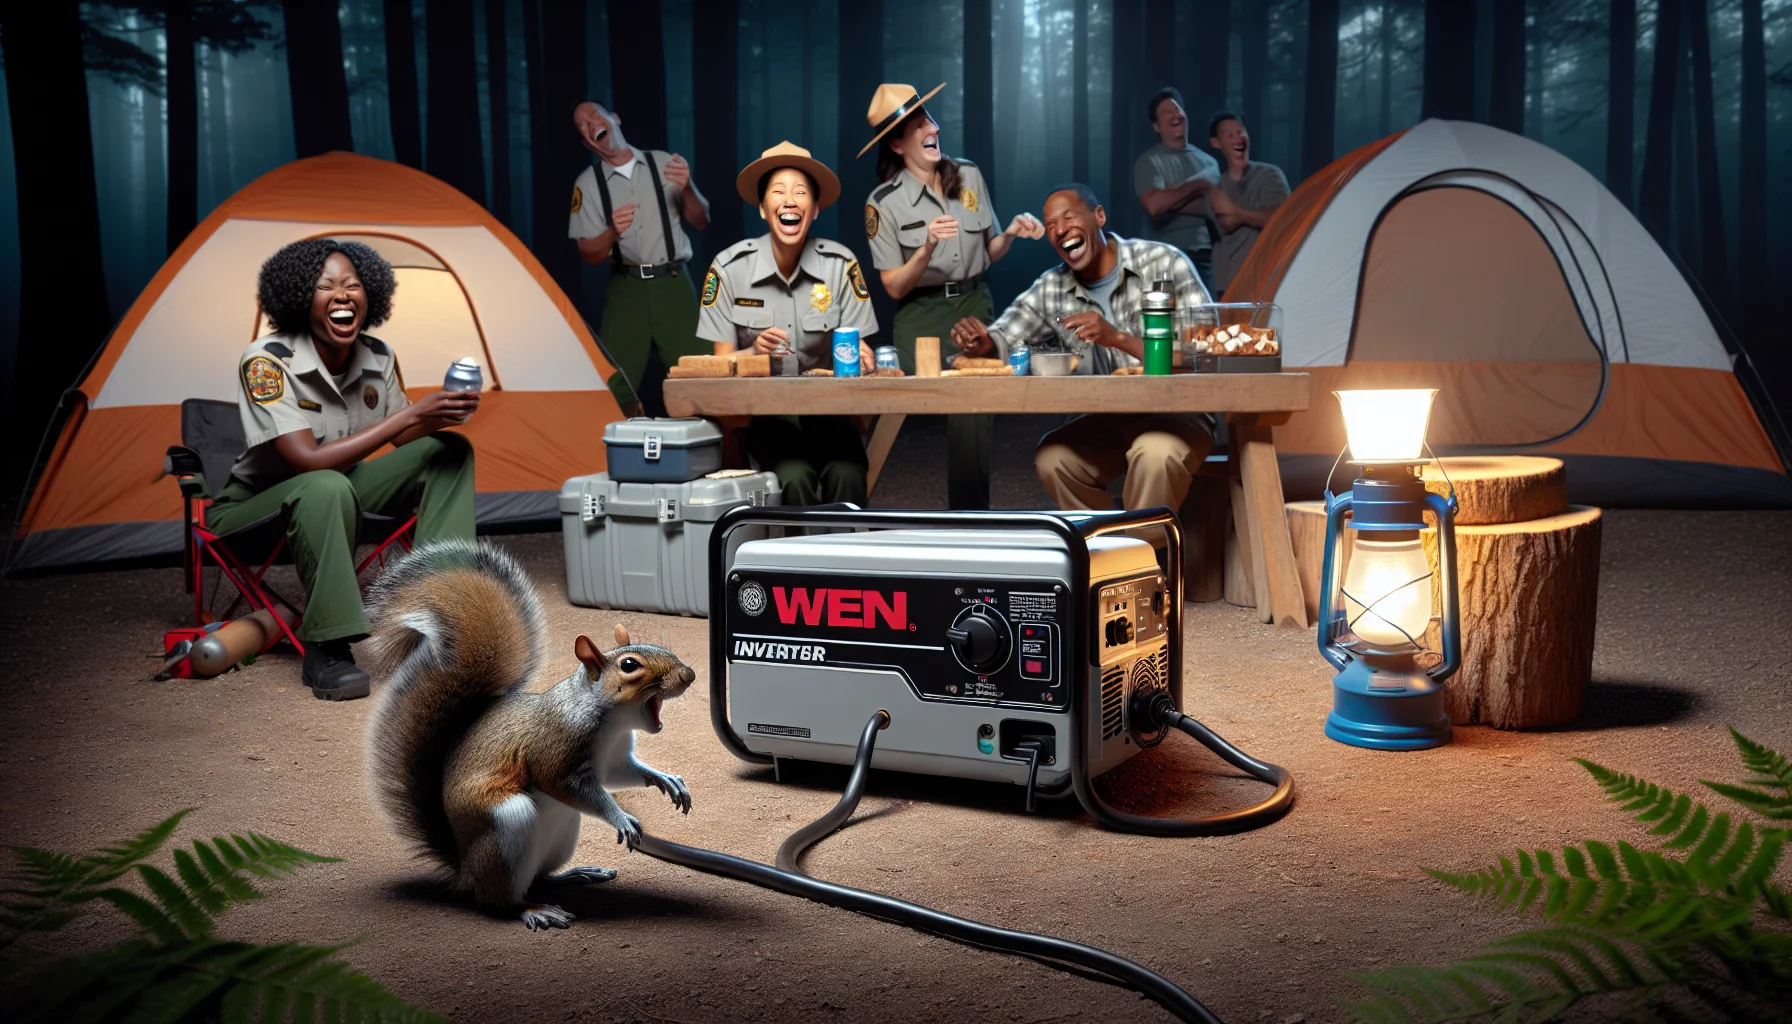 A comedic scene taking place outdoors in a campsite. A WEN Inverter Generator is sitting amongst camping equipment and a couple of tents. A squirrel is photographed attempting to interact with it, perhaps trying to operate the generator. Additional onlookers might include a black female park ranger in uniform chuckling at the scene, and a Hispanic male camper in the background, laughing while roasting marshmallows. All around them, there's a darkness signalling a blackout, emphasized with the only light source coming from a lantern placed near the generator, signifying the essential need for electricity.